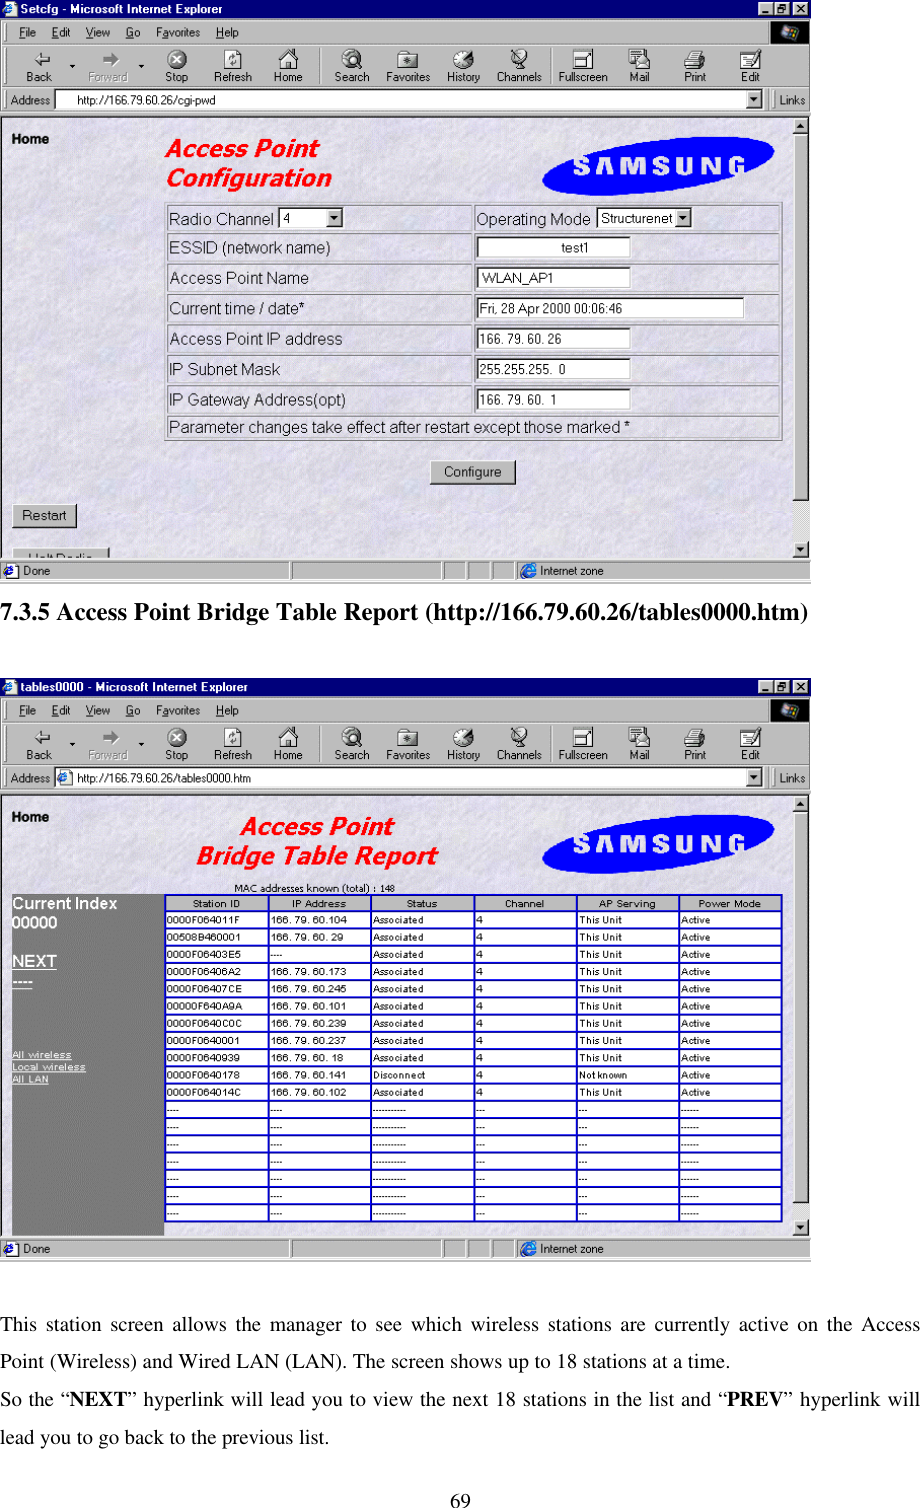 697.3.5 Access Point Bridge Table Report (http://166.79.60.26/tables0000.htm)This station screen allows the manager to see which wireless stations are currently active on the AccessPoint (Wireless) and Wired LAN (LAN). The screen shows up to 18 stations at a time.So the “NEXT” hyperlink will lead you to view the next 18 stations in the list and “PREV” hyperlink willlead you to go back to the previous list.